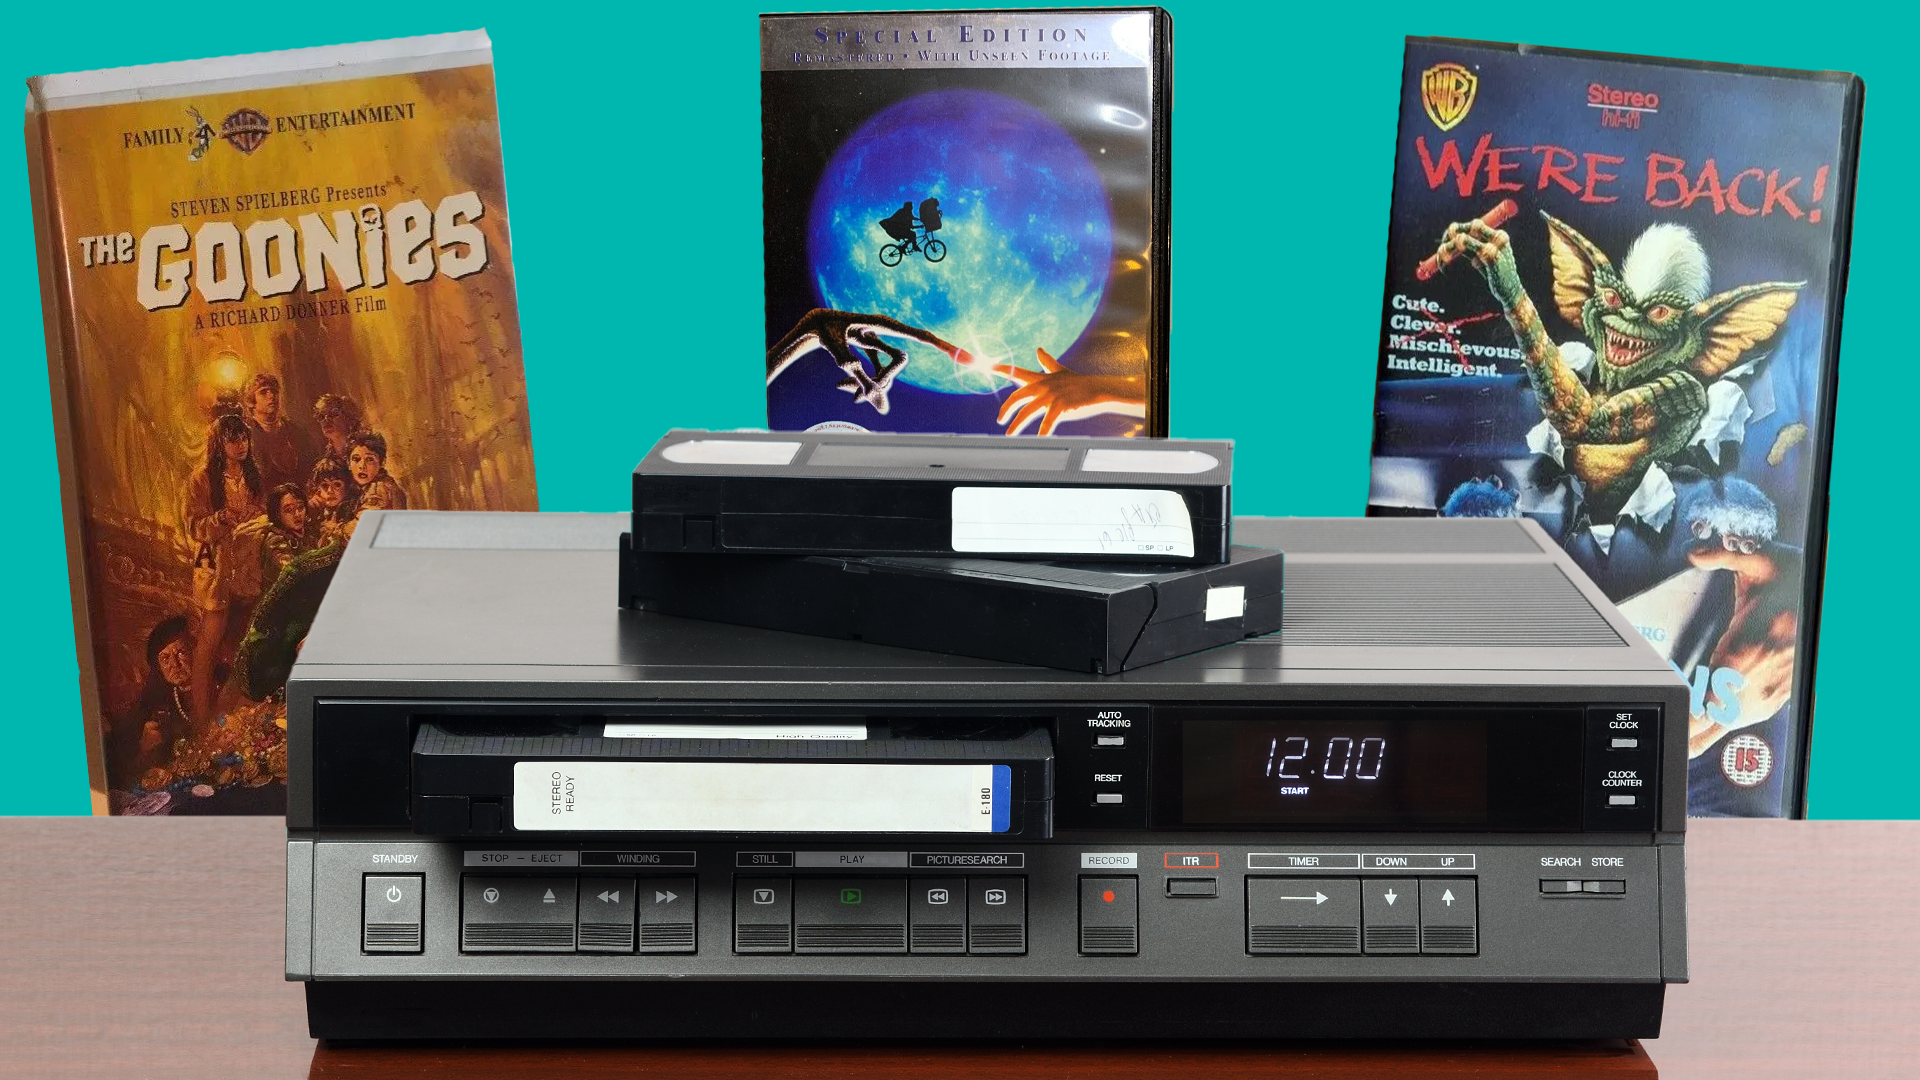 Glowing VHS tape USB hub will make you remember the good old days